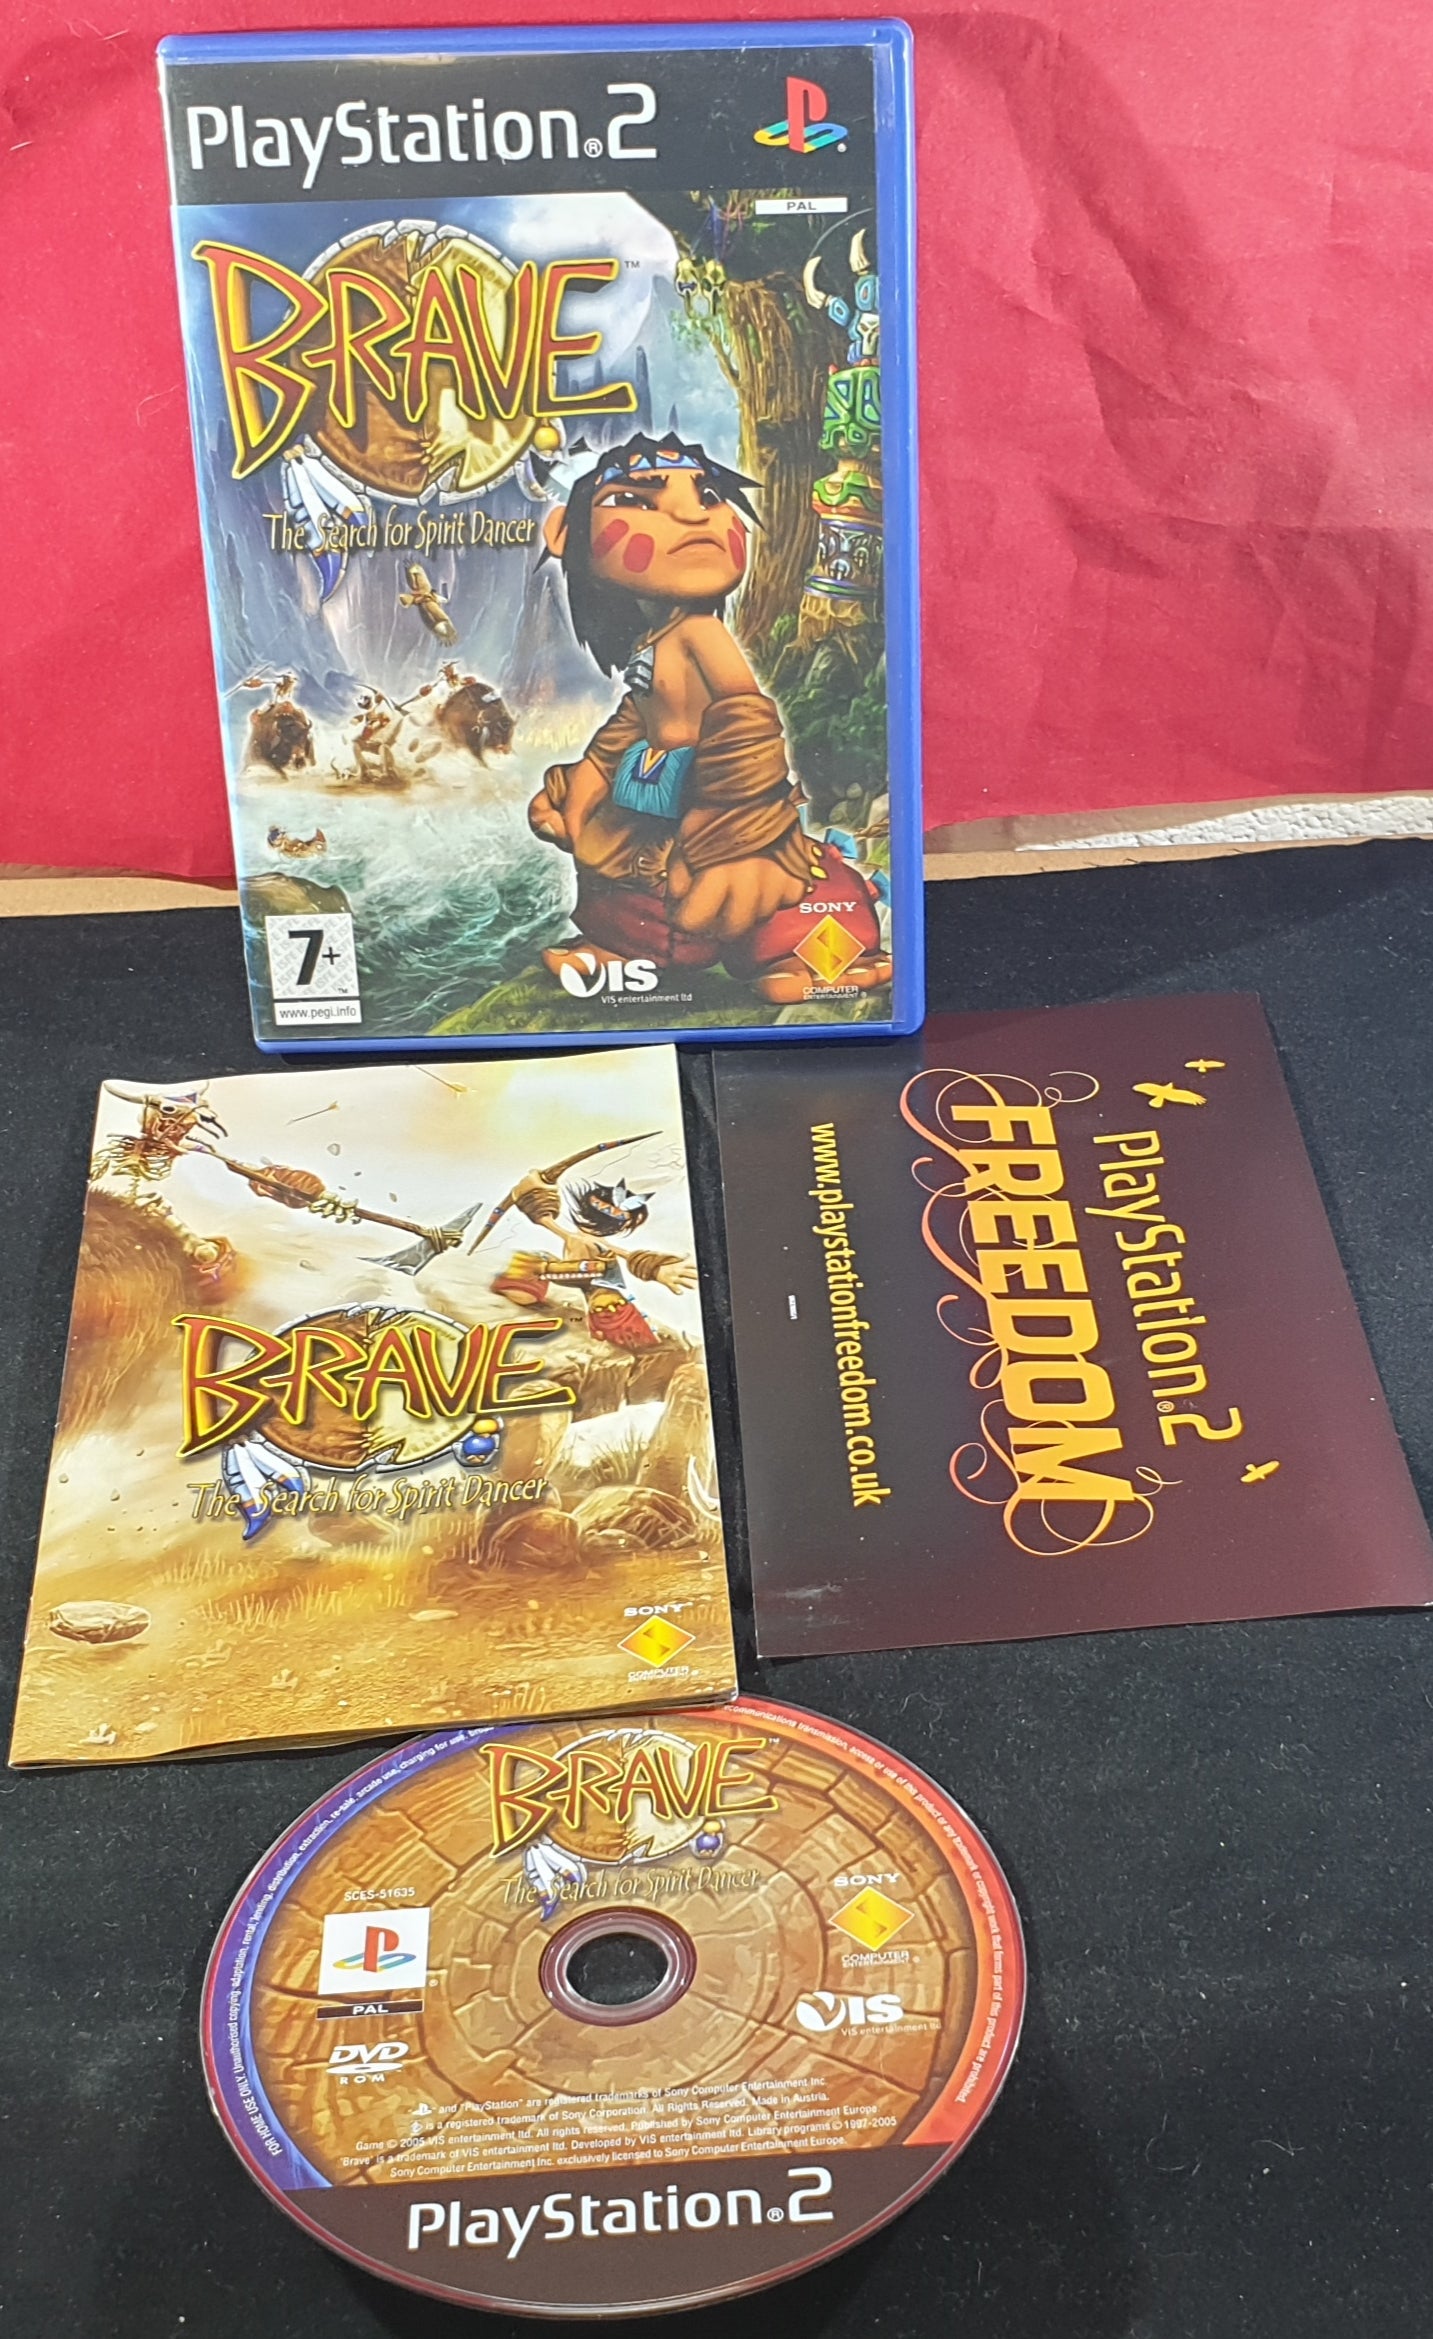 Brave The Search for Spirit Dancer Sony Playstation 2 (PS2) Game – Retro  Gamer Heaven